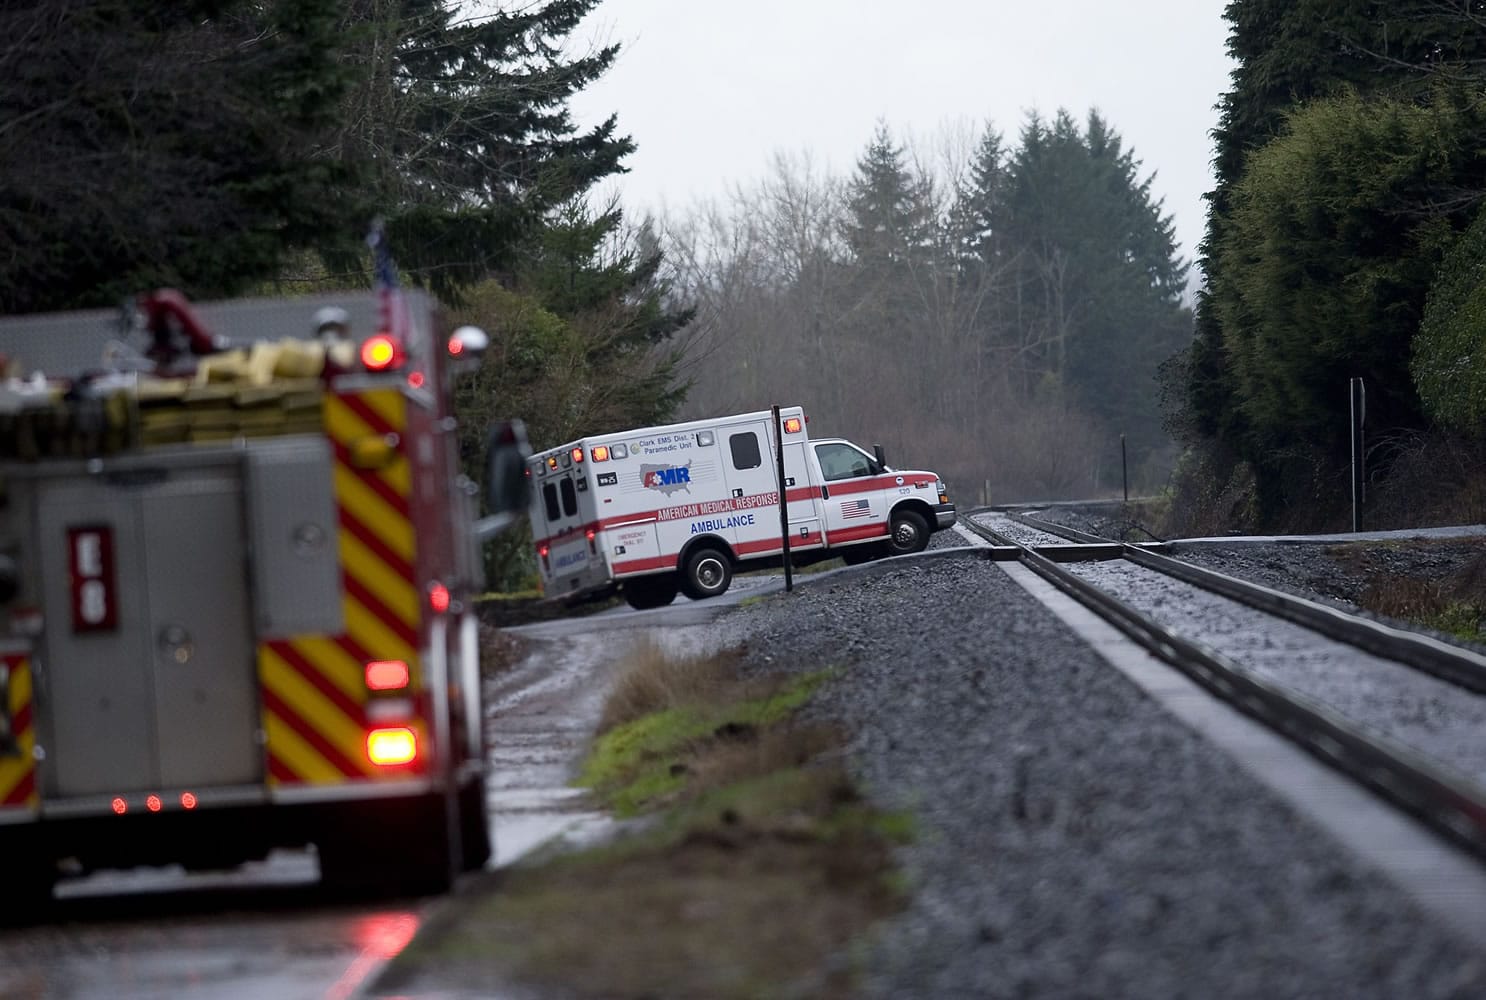 An ambulance leaves a private dock carrying Ana R. Ramos, 30, of Vancouver, who reportedly jumped from the northwest side of the I-205 bridge shortly after 1 p.m. Friday.